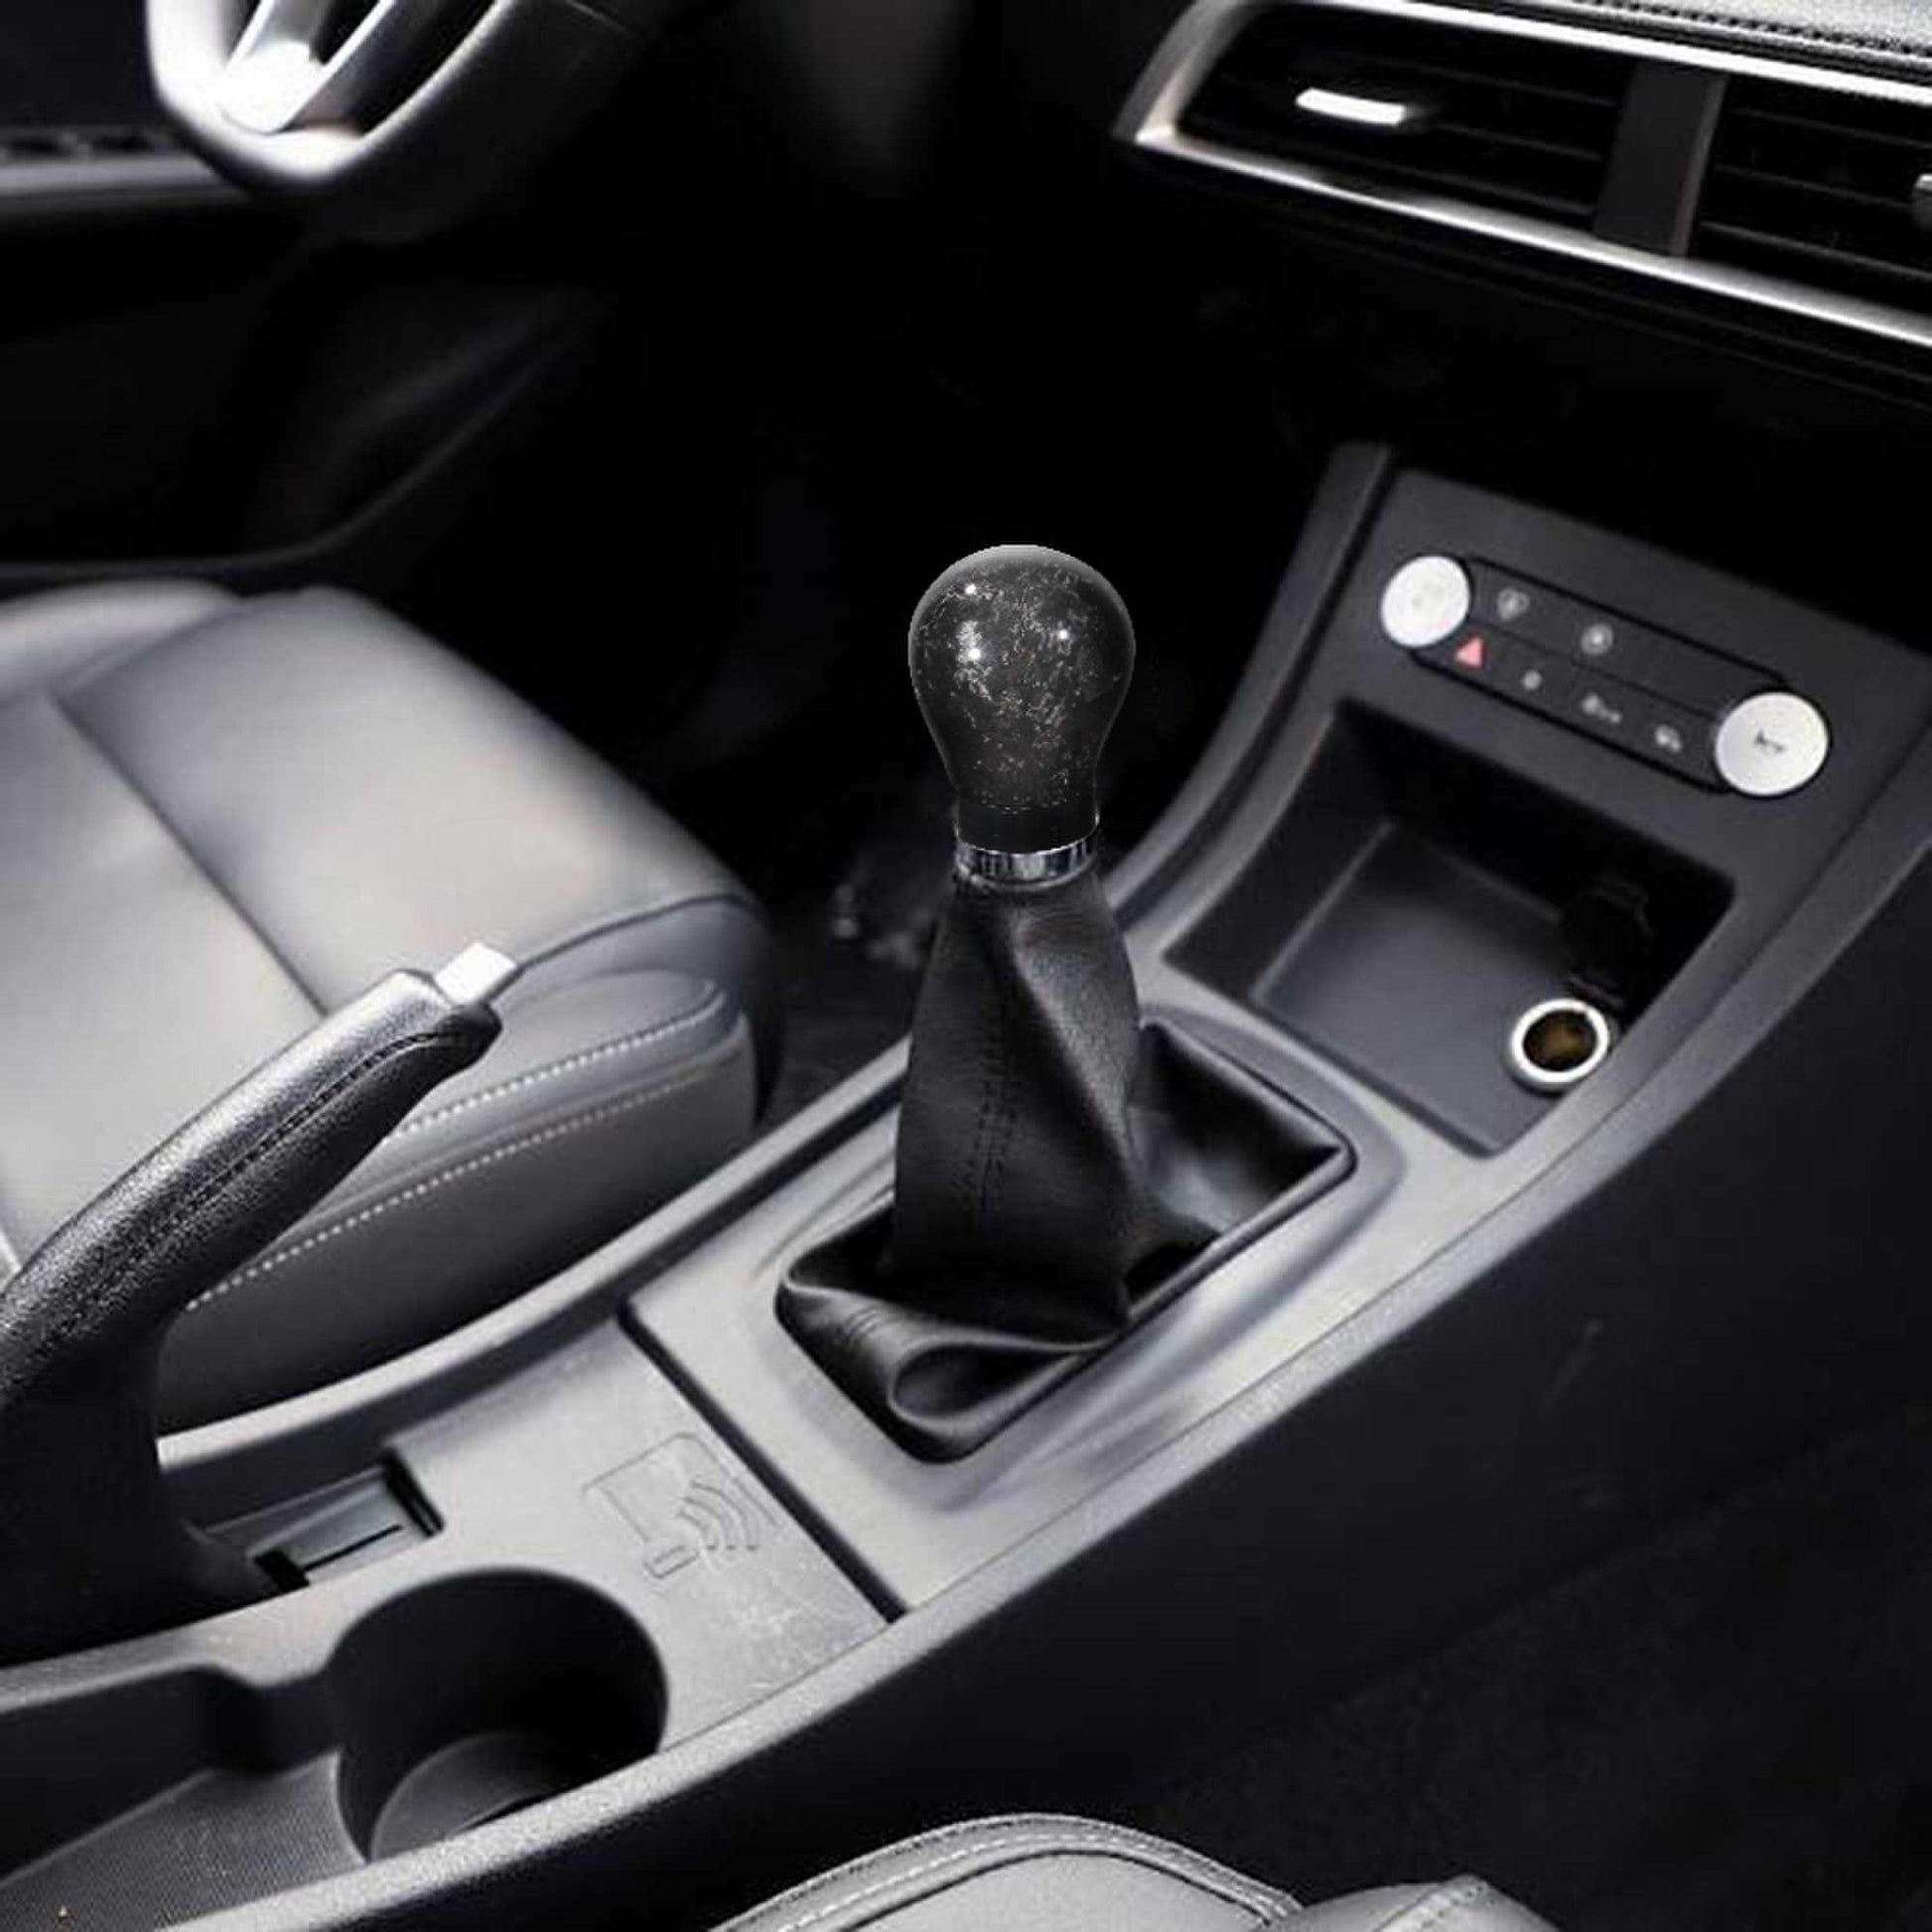 RASTP Universal Forged Carbon Fiber Ball Shift Knob Car Manual Shift Lever Handle with 3 Adapters - RASTP